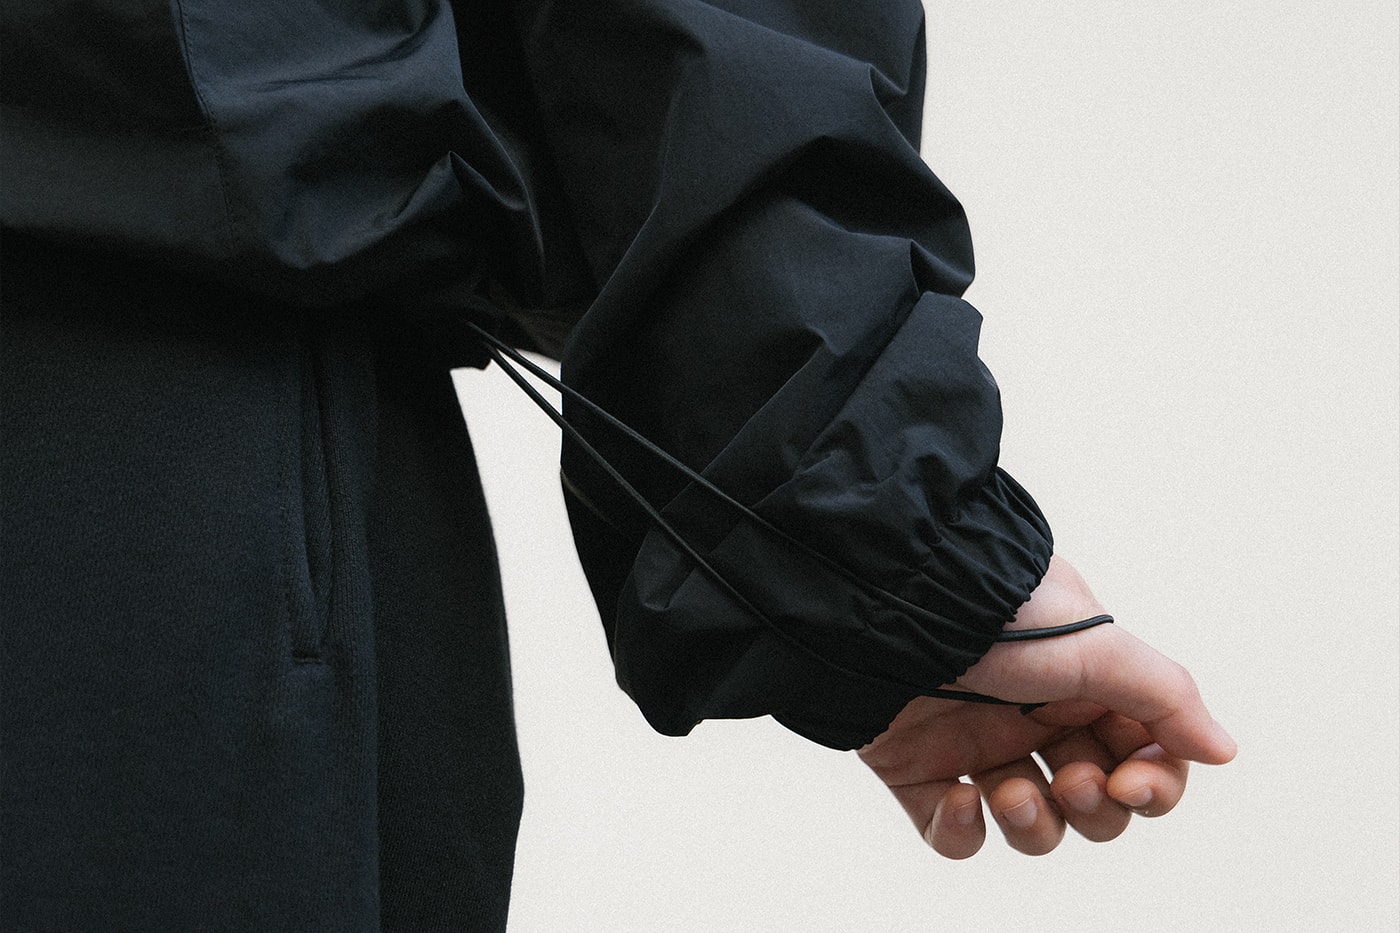 Hypebeast Goods and Services Drop 2 Minimalist Capsule Collection Track Pants Jacket Tech Shirt Black